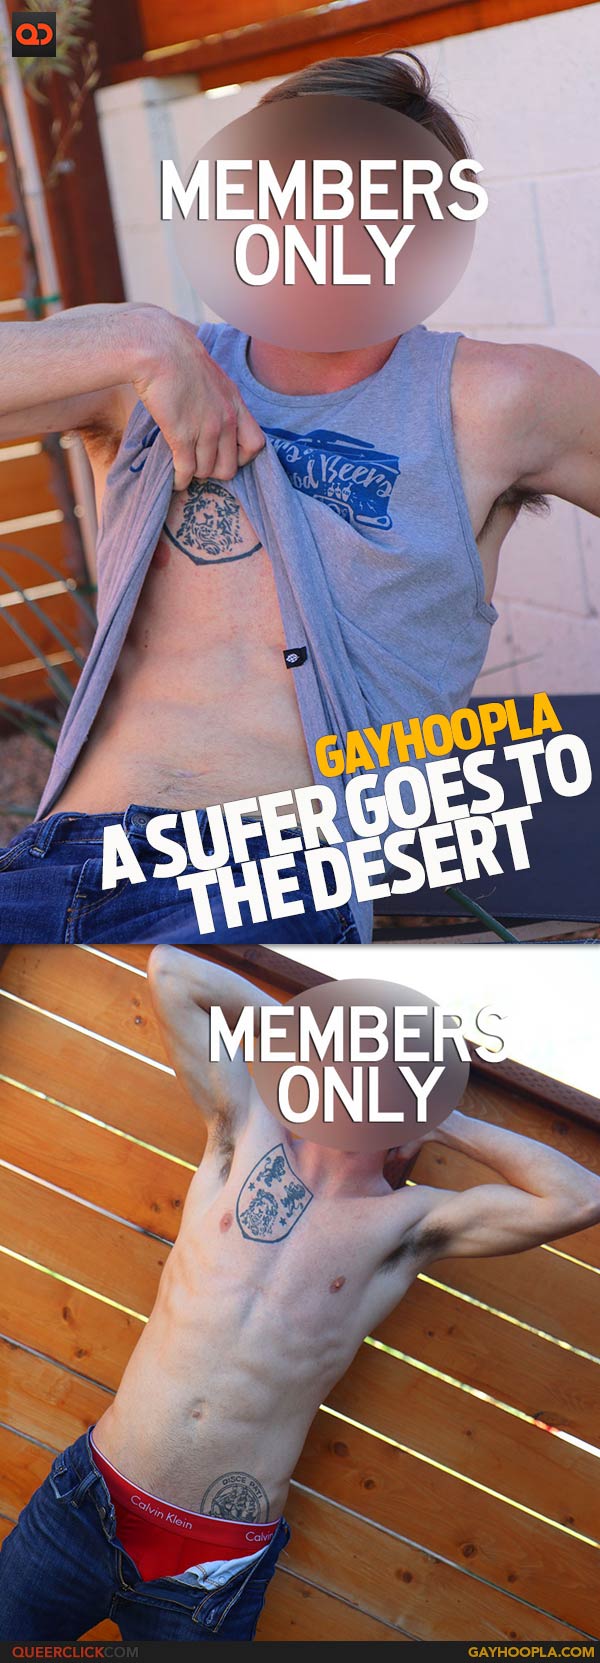 GayHoopla: A Surfer Goes to the Desert